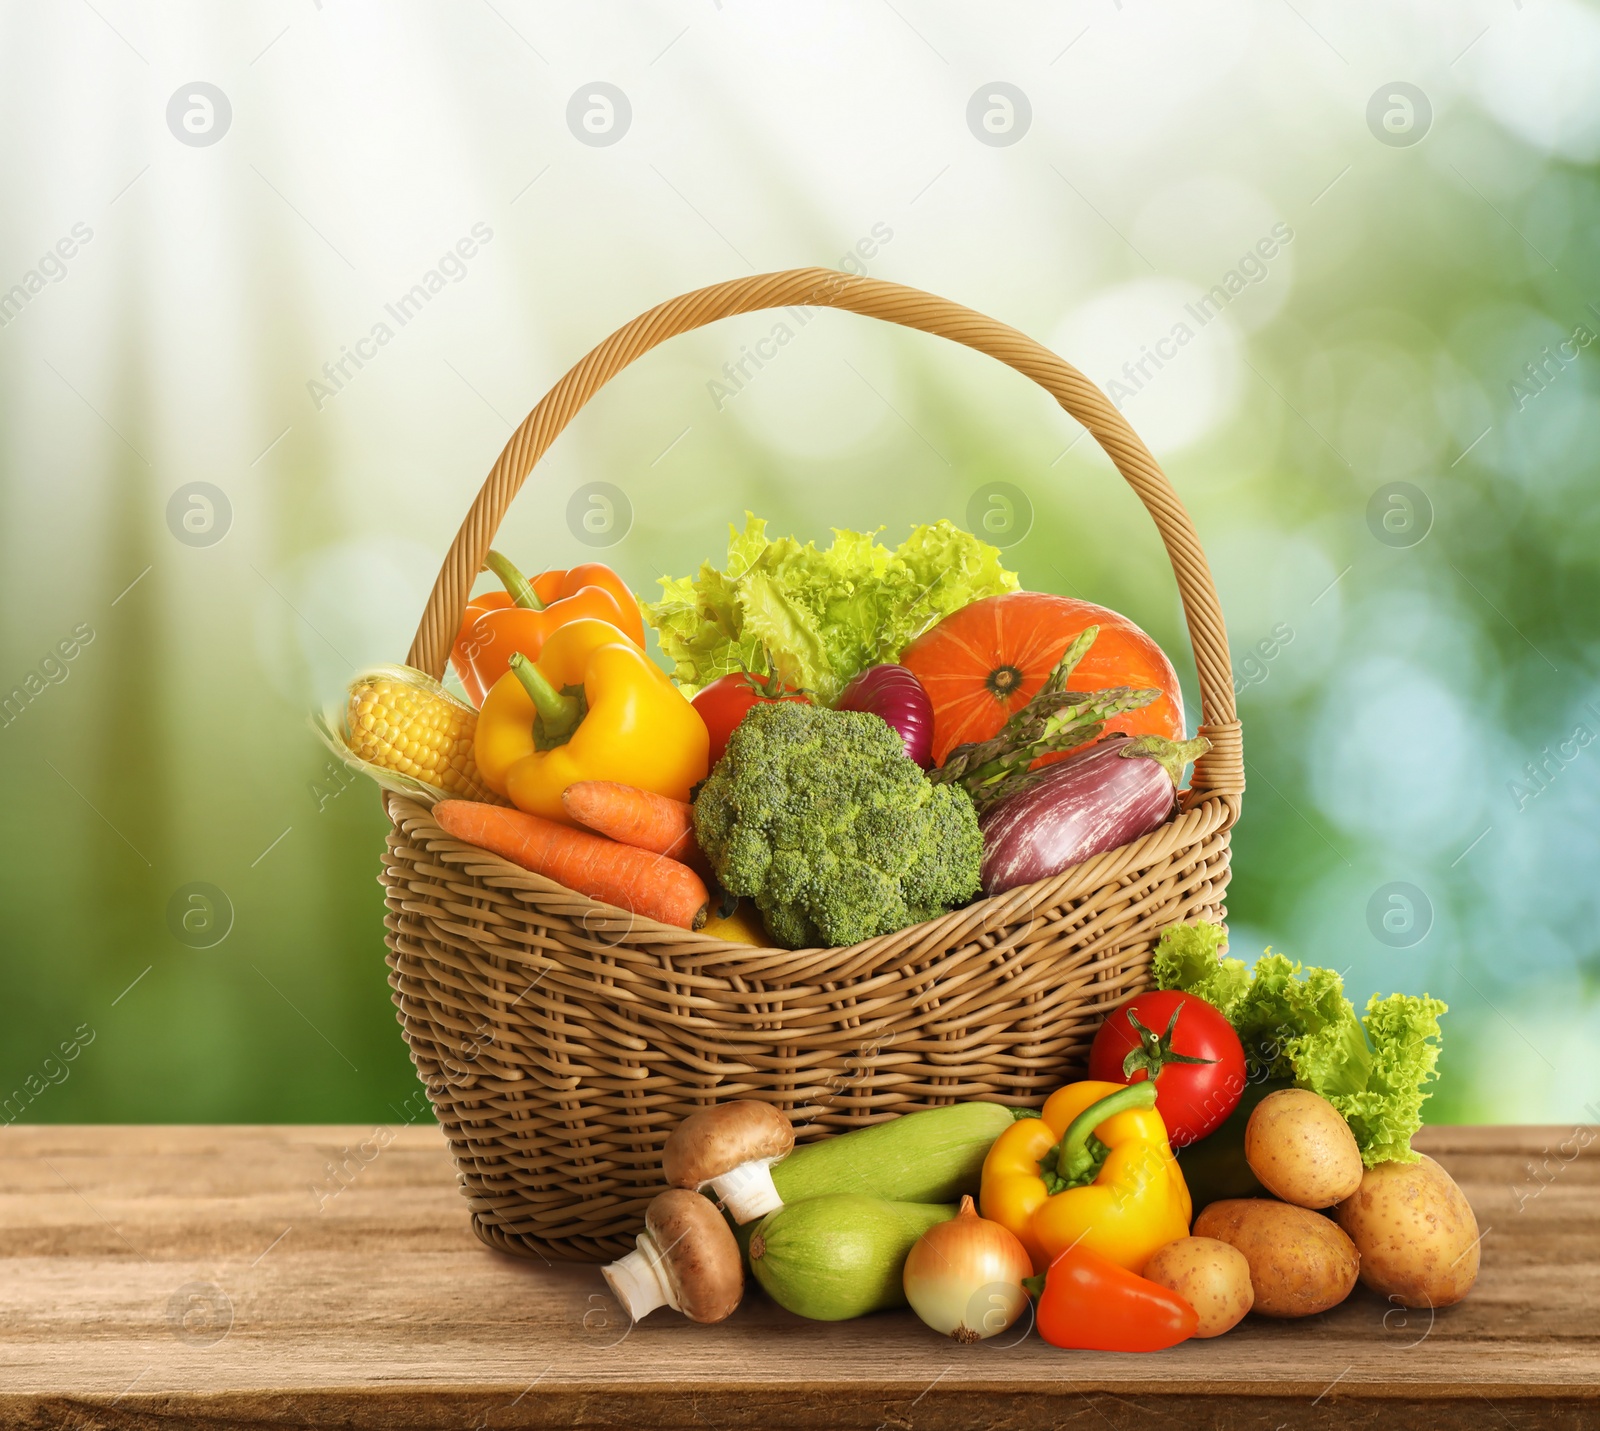 Image of Wicker basket with fresh vegetables on wooden table against blurred background